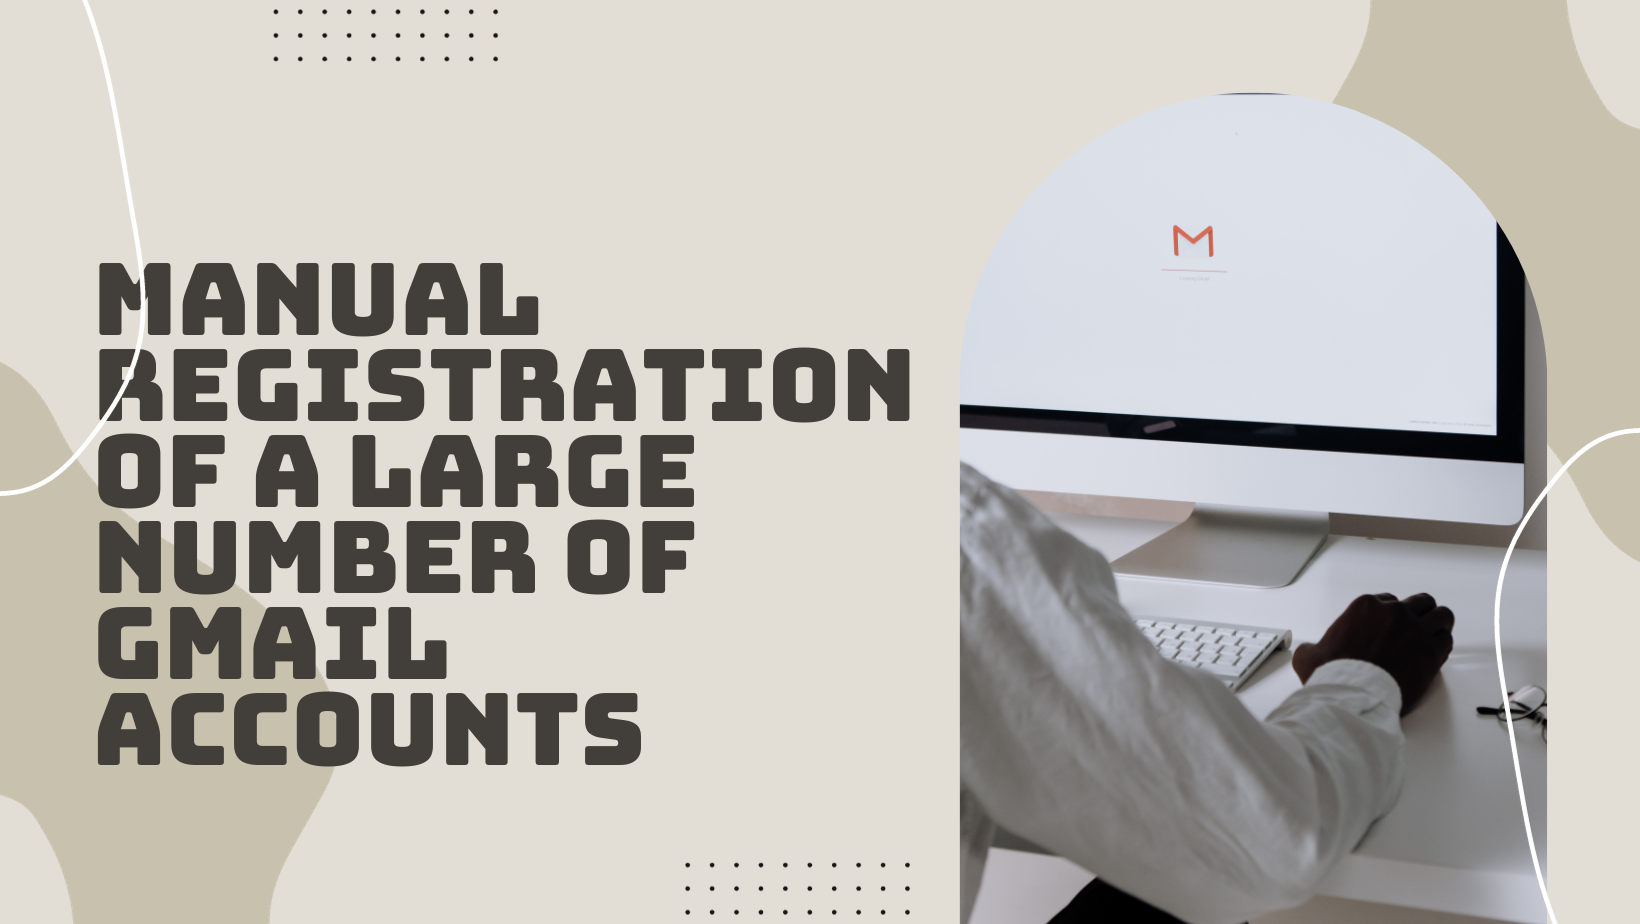 Why Avoid Manual Registration of a Large Number of Gmail Accounts?